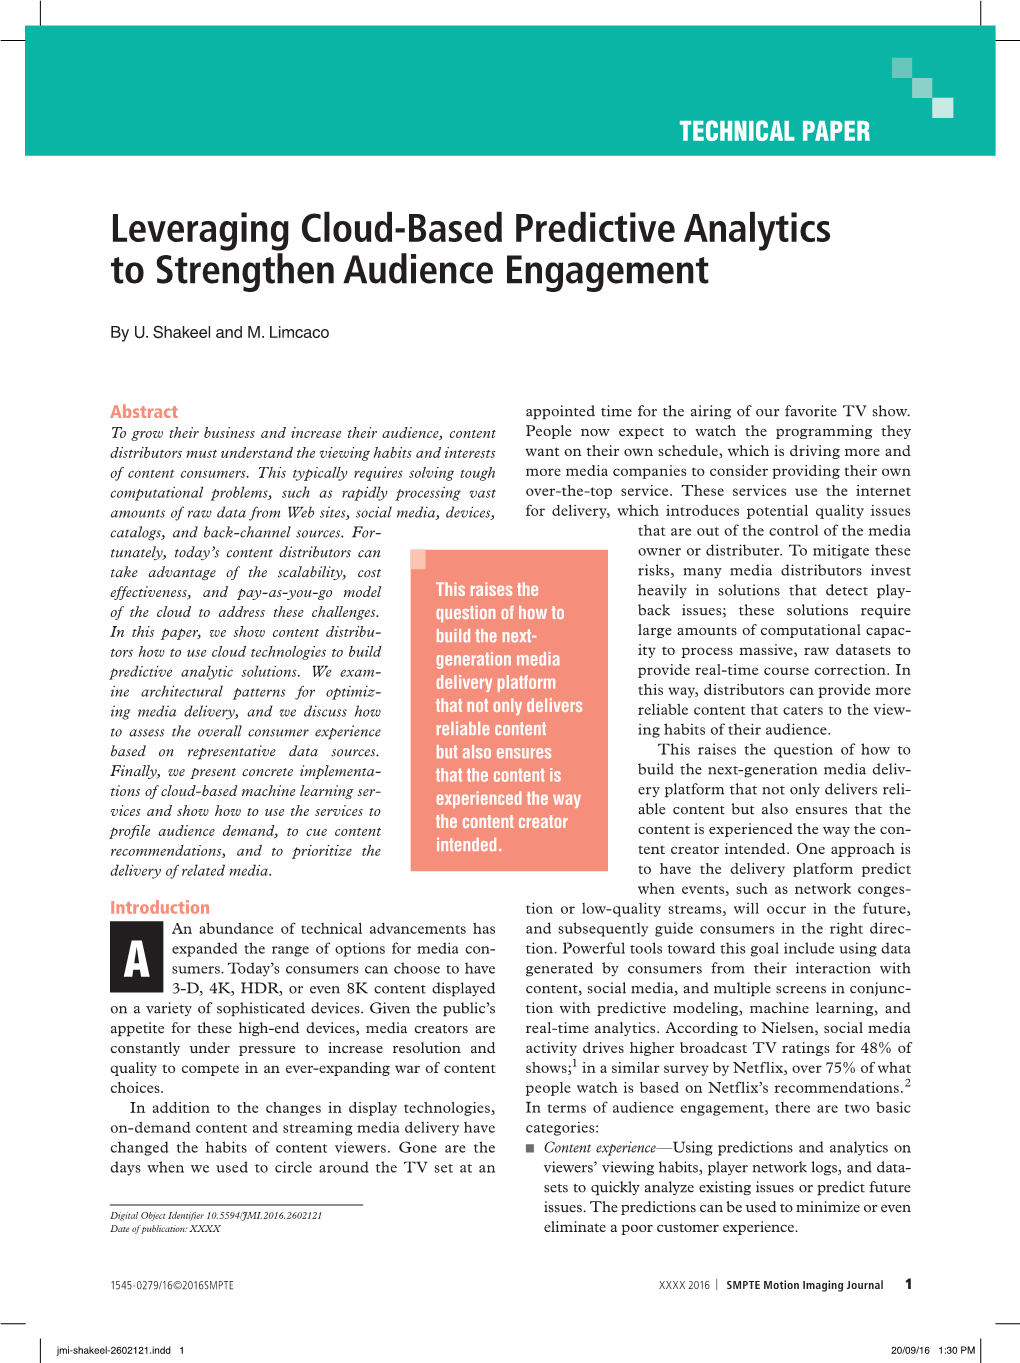 Leveraging Cloud-Based Predictive Analytics to Strengthen Audience Engagement